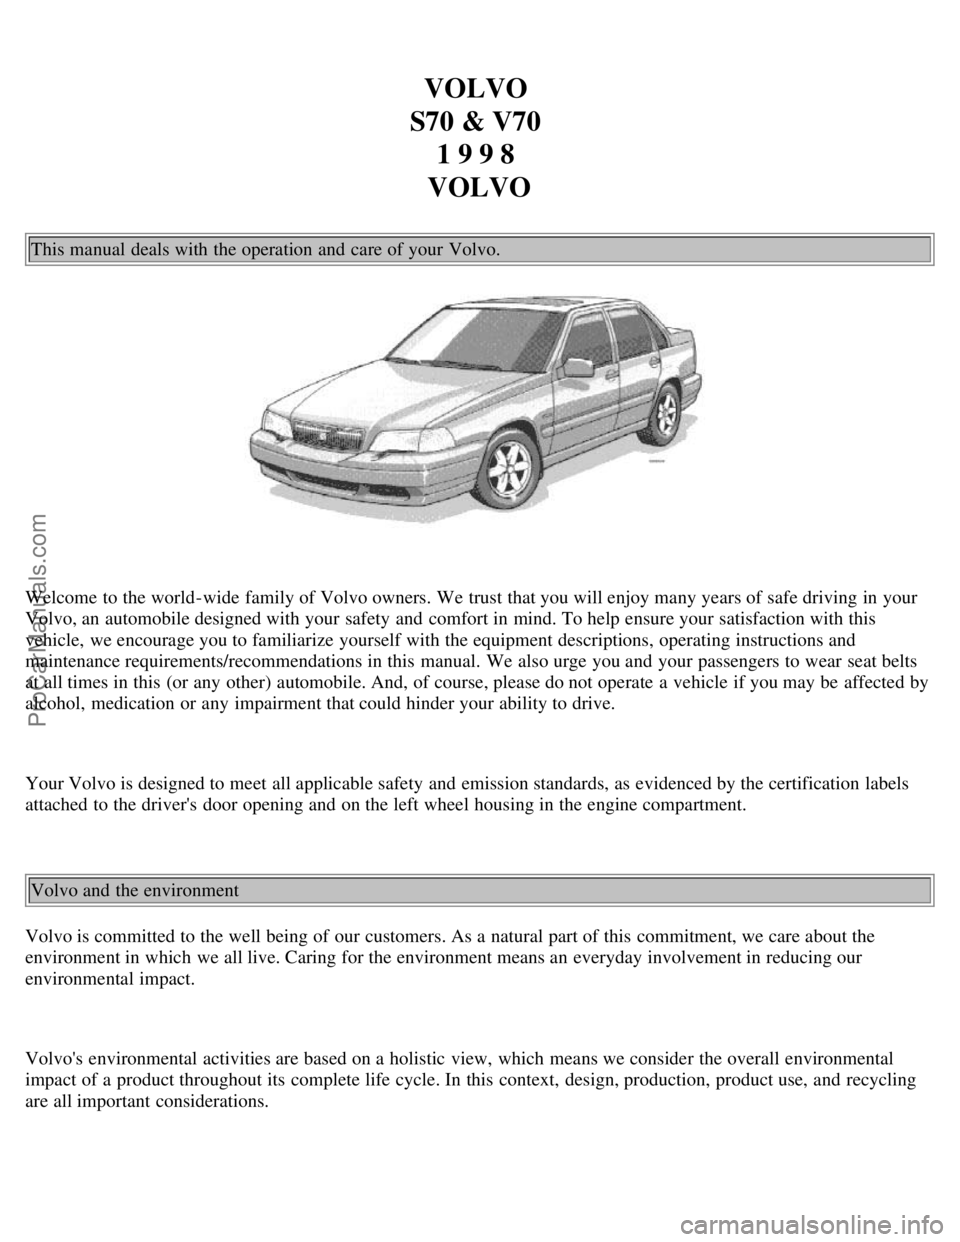 VOLVO S70 1998  Owners Manual VOLVO 
S70 & V70  1 9 9 8 
VOLVO
This manual  deals with the operation and  care of your Volvo.
Welcome to the world-wide  family of Volvo owners. We trust that you will enjoy many years of safe drivi